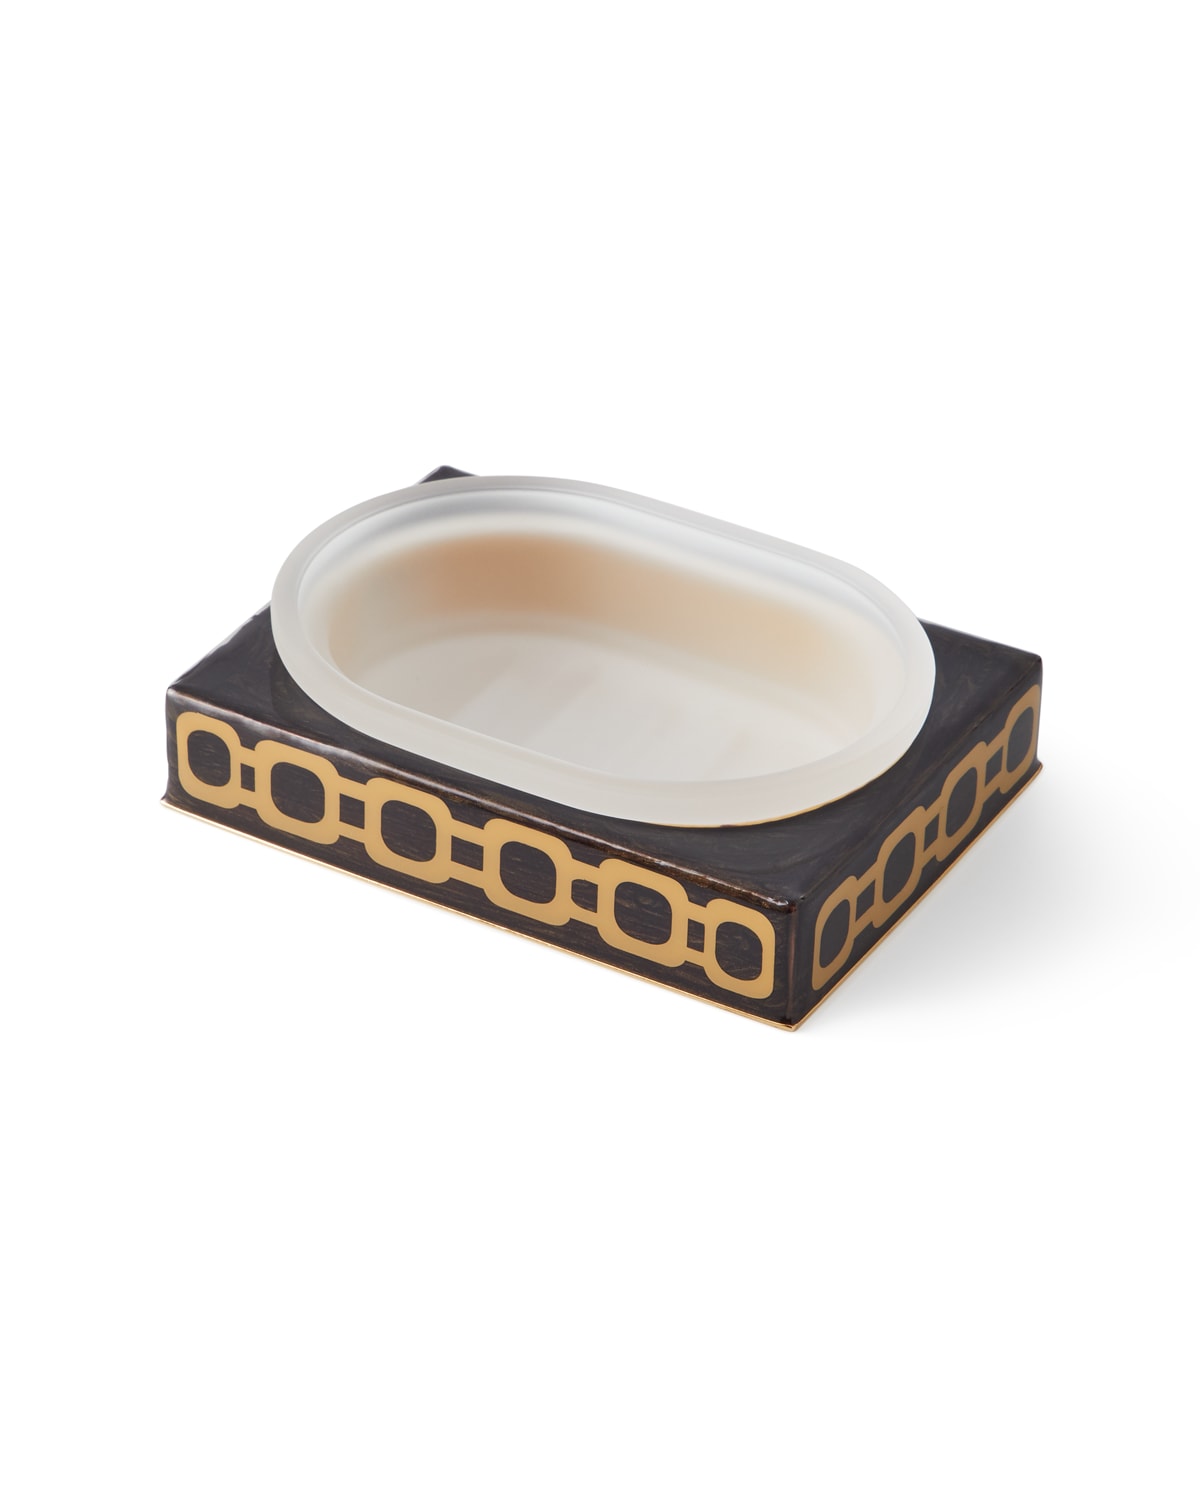 Image Mike & Ally Meurice Soap Dish